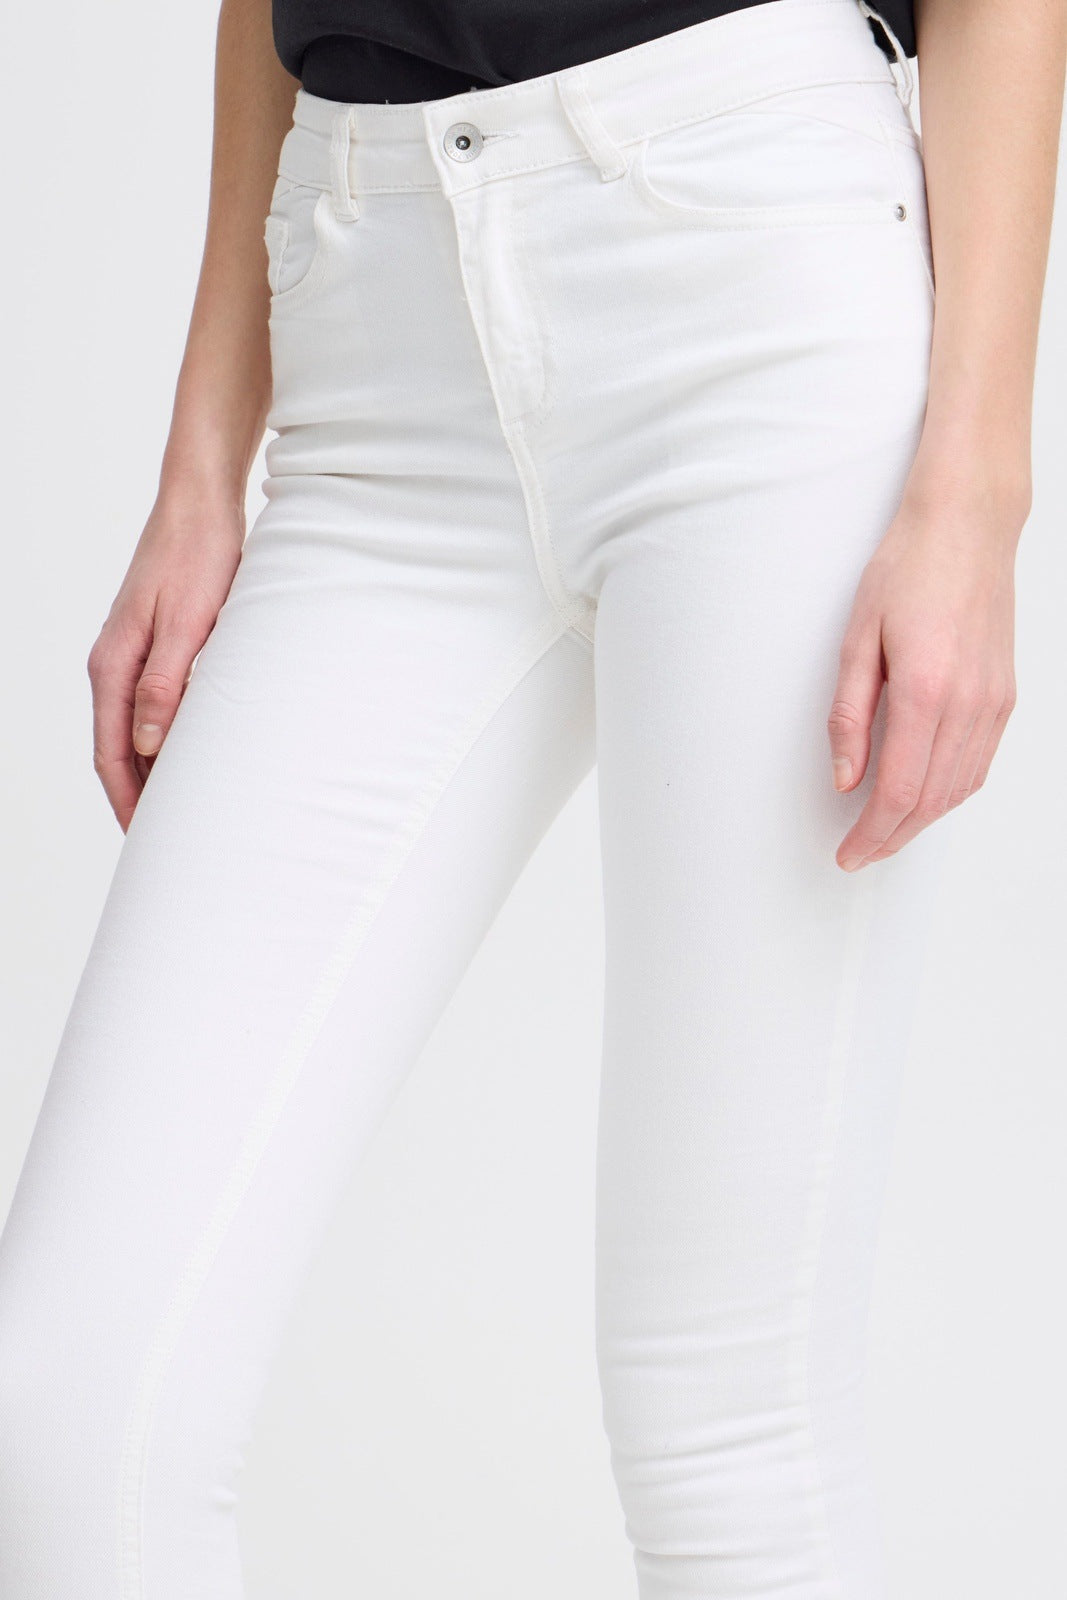 B.young Denim Jeans - White 2 Shaws Department Stores